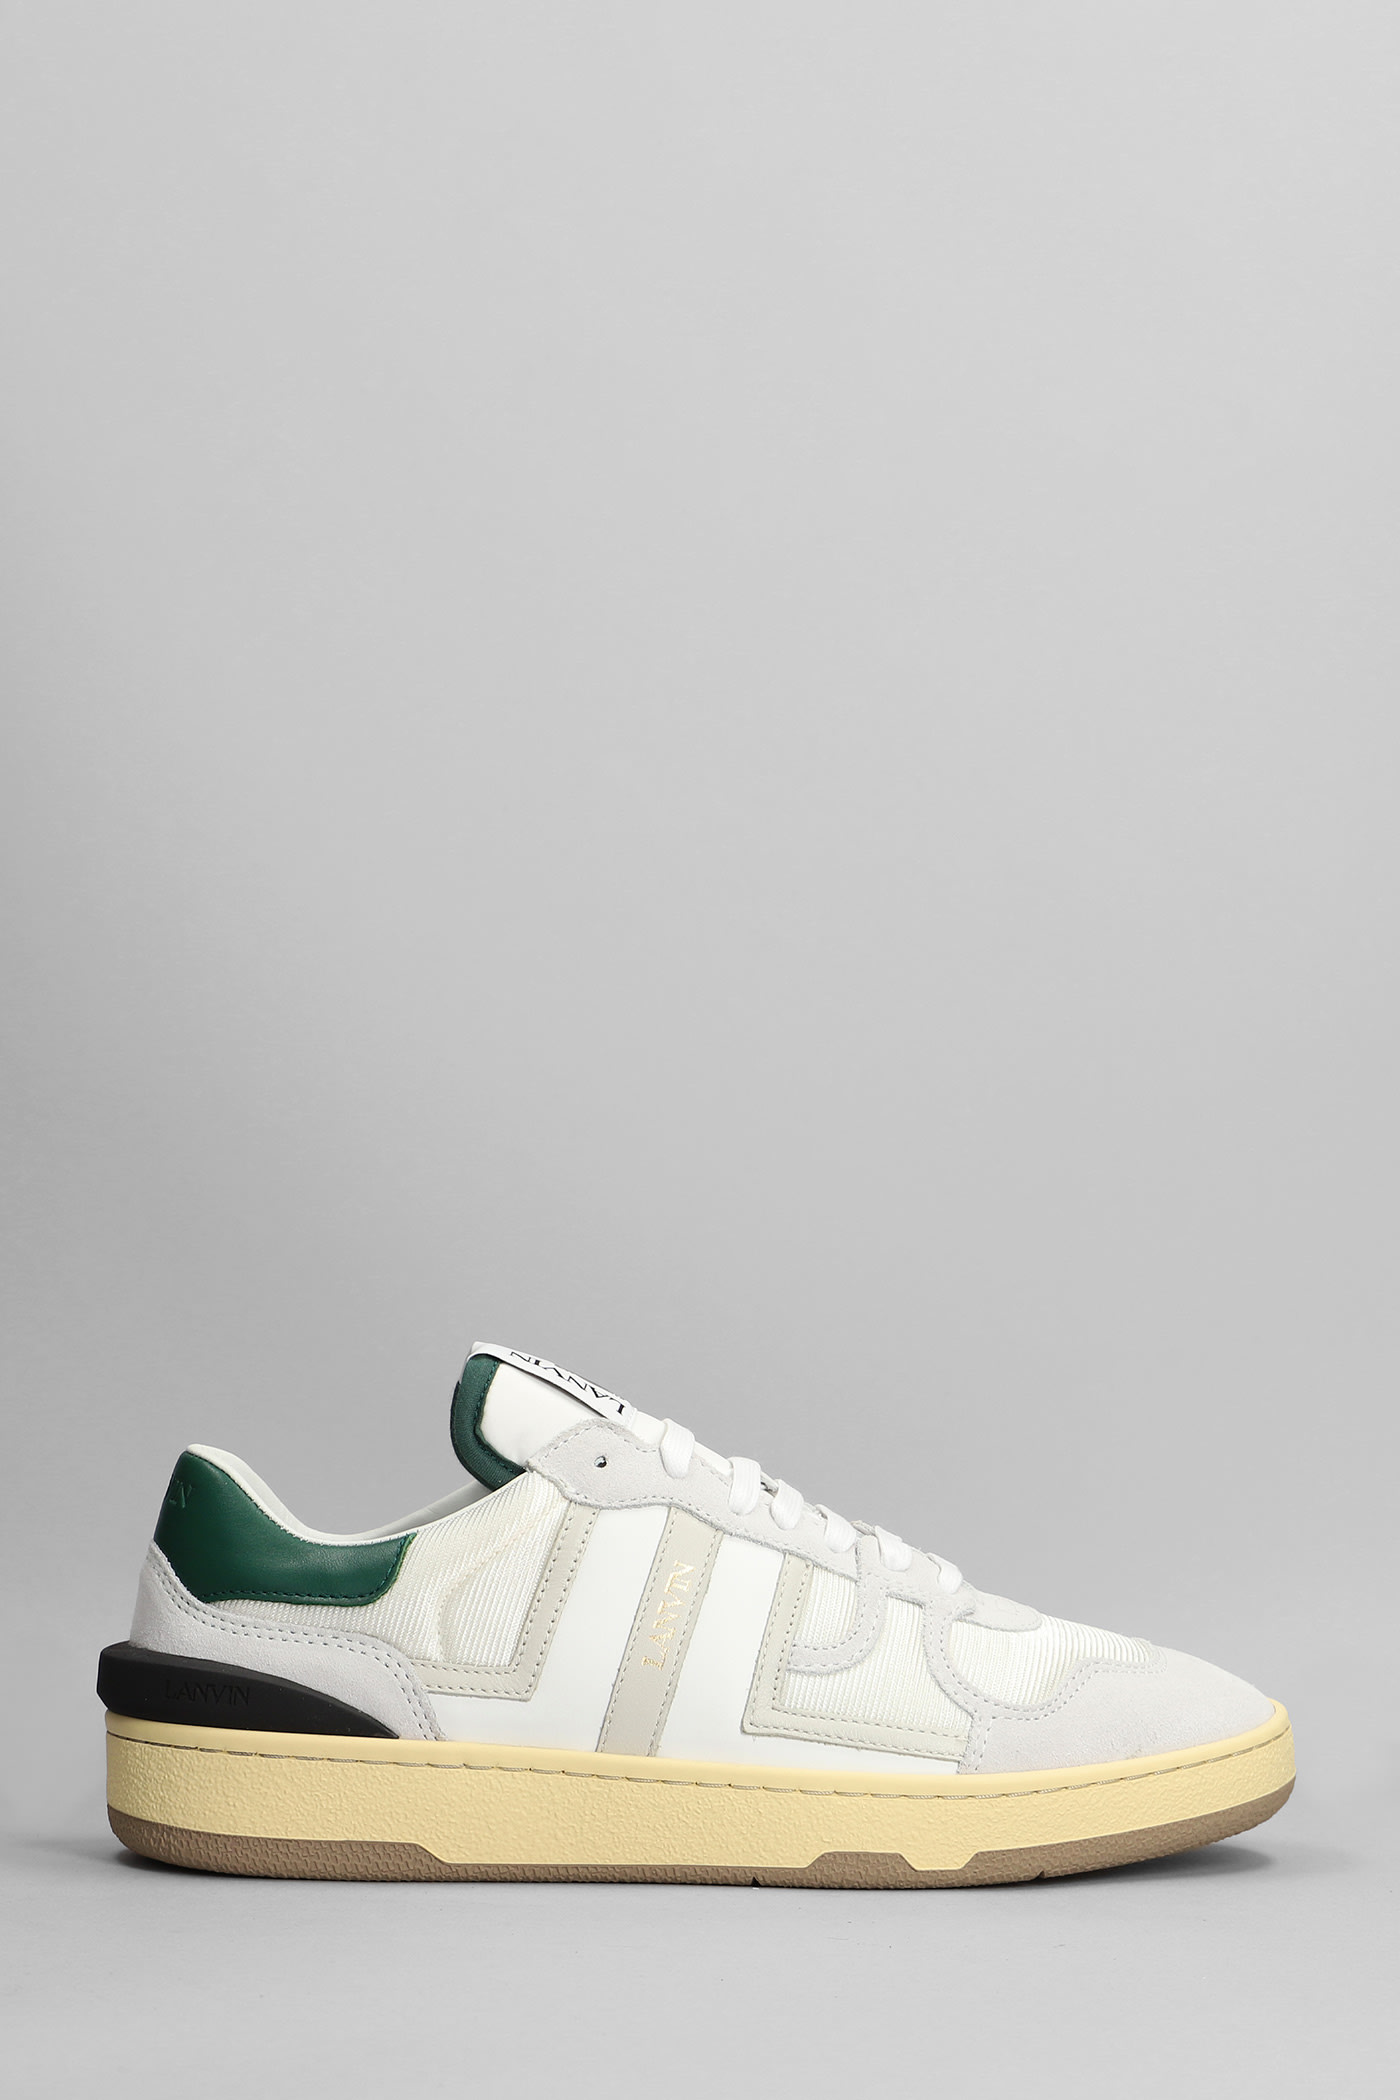 Lanvin Sneakers In White Leather